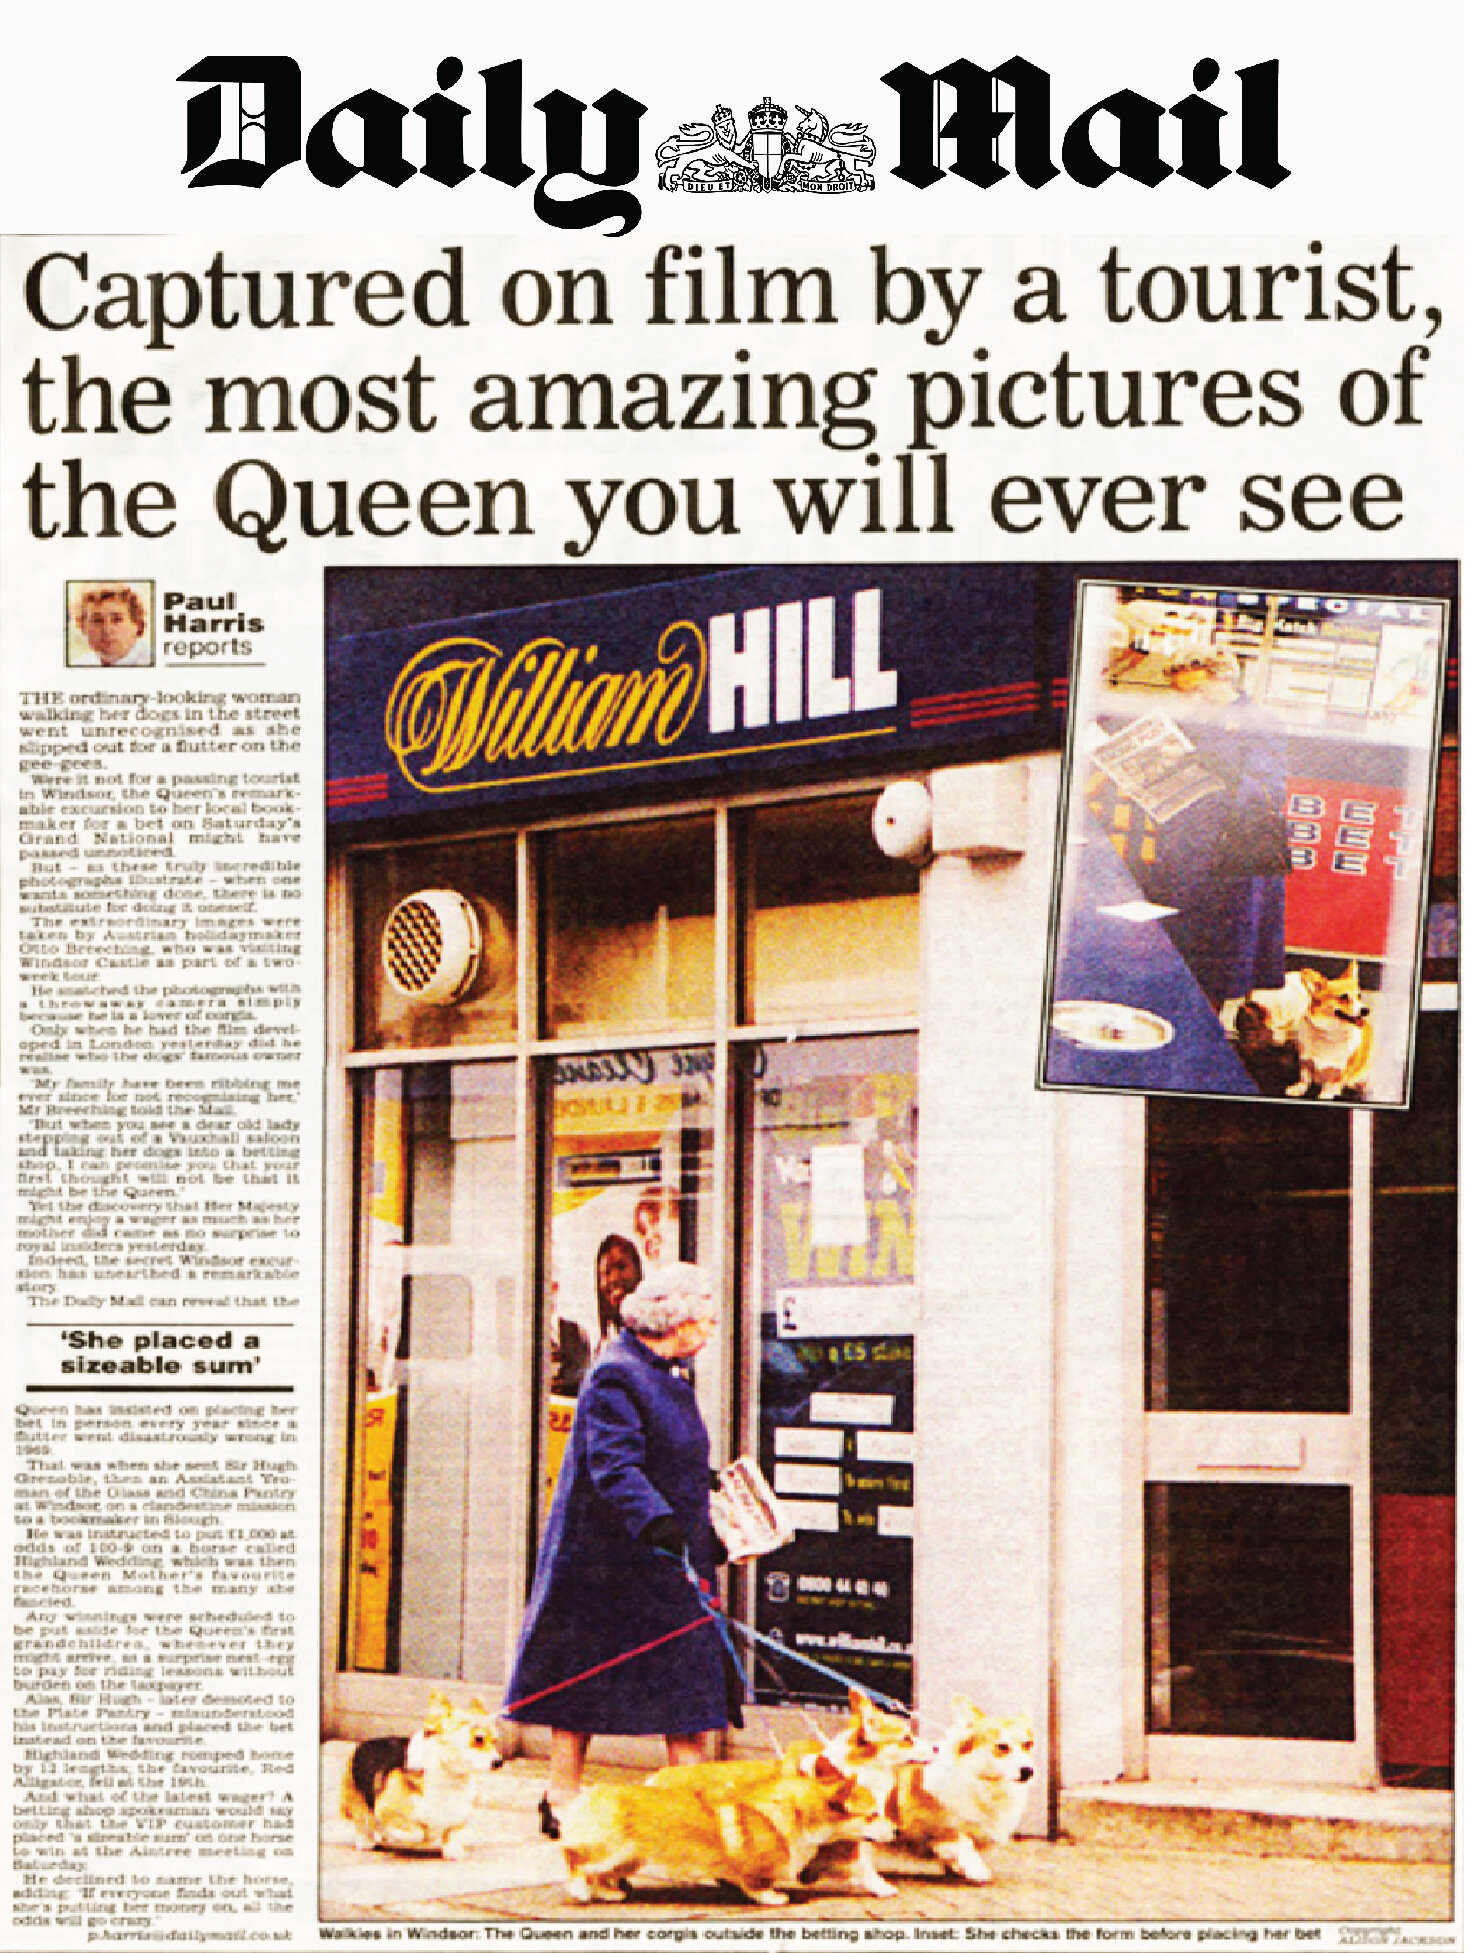 Daily Mail_captured on film queen.jpg